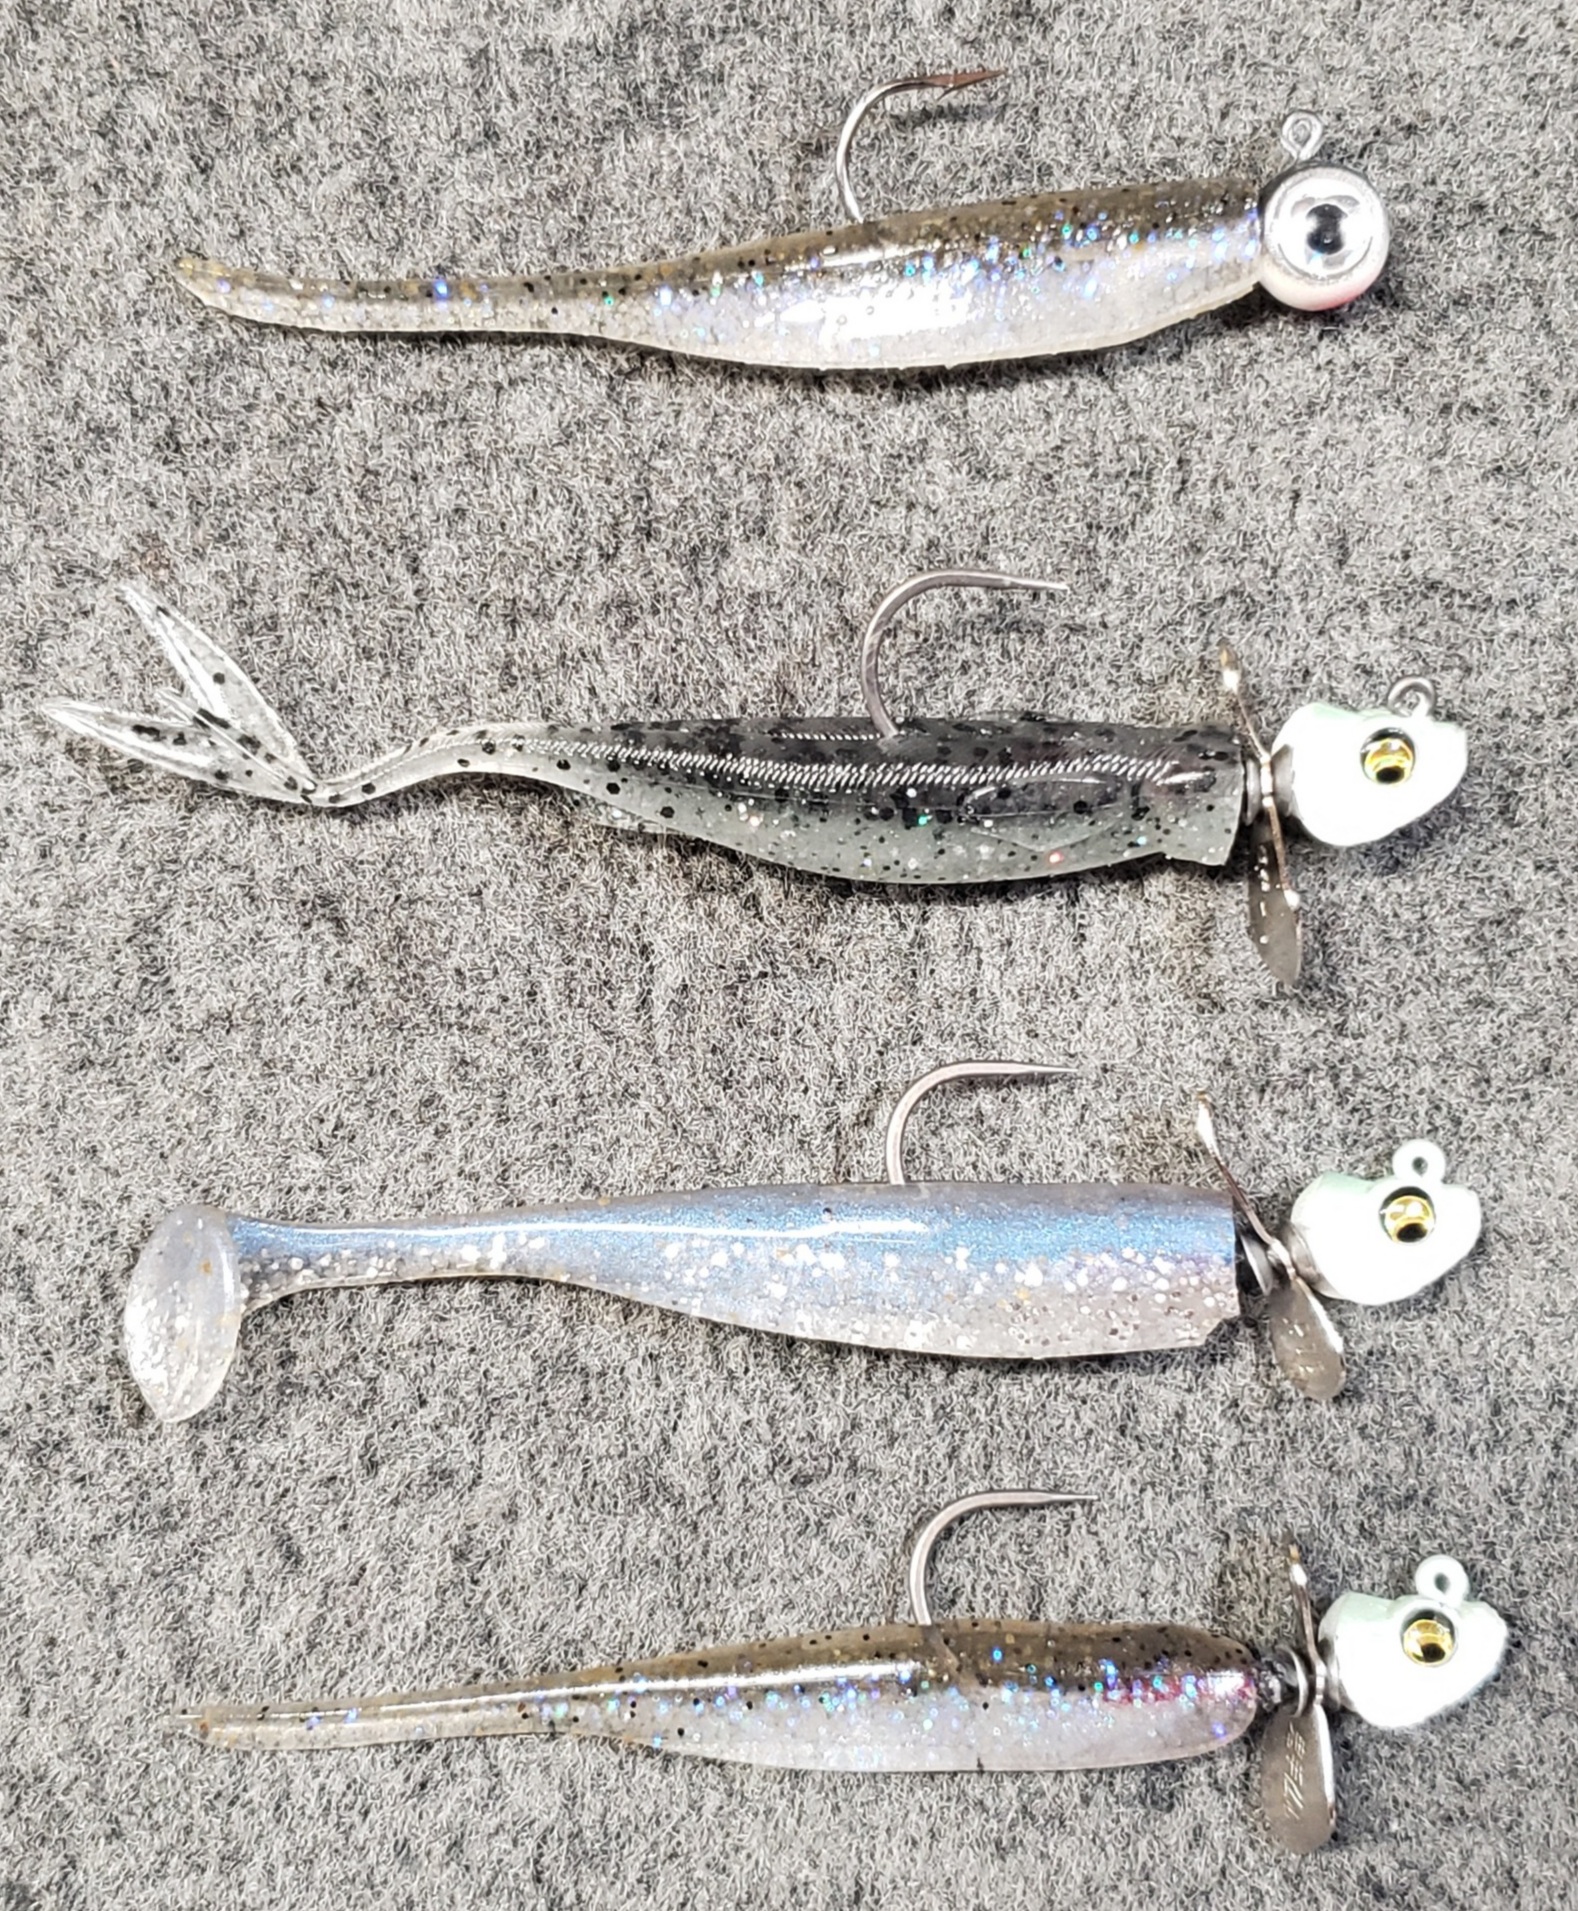 How much do Keitech swimbaits and lures weight?